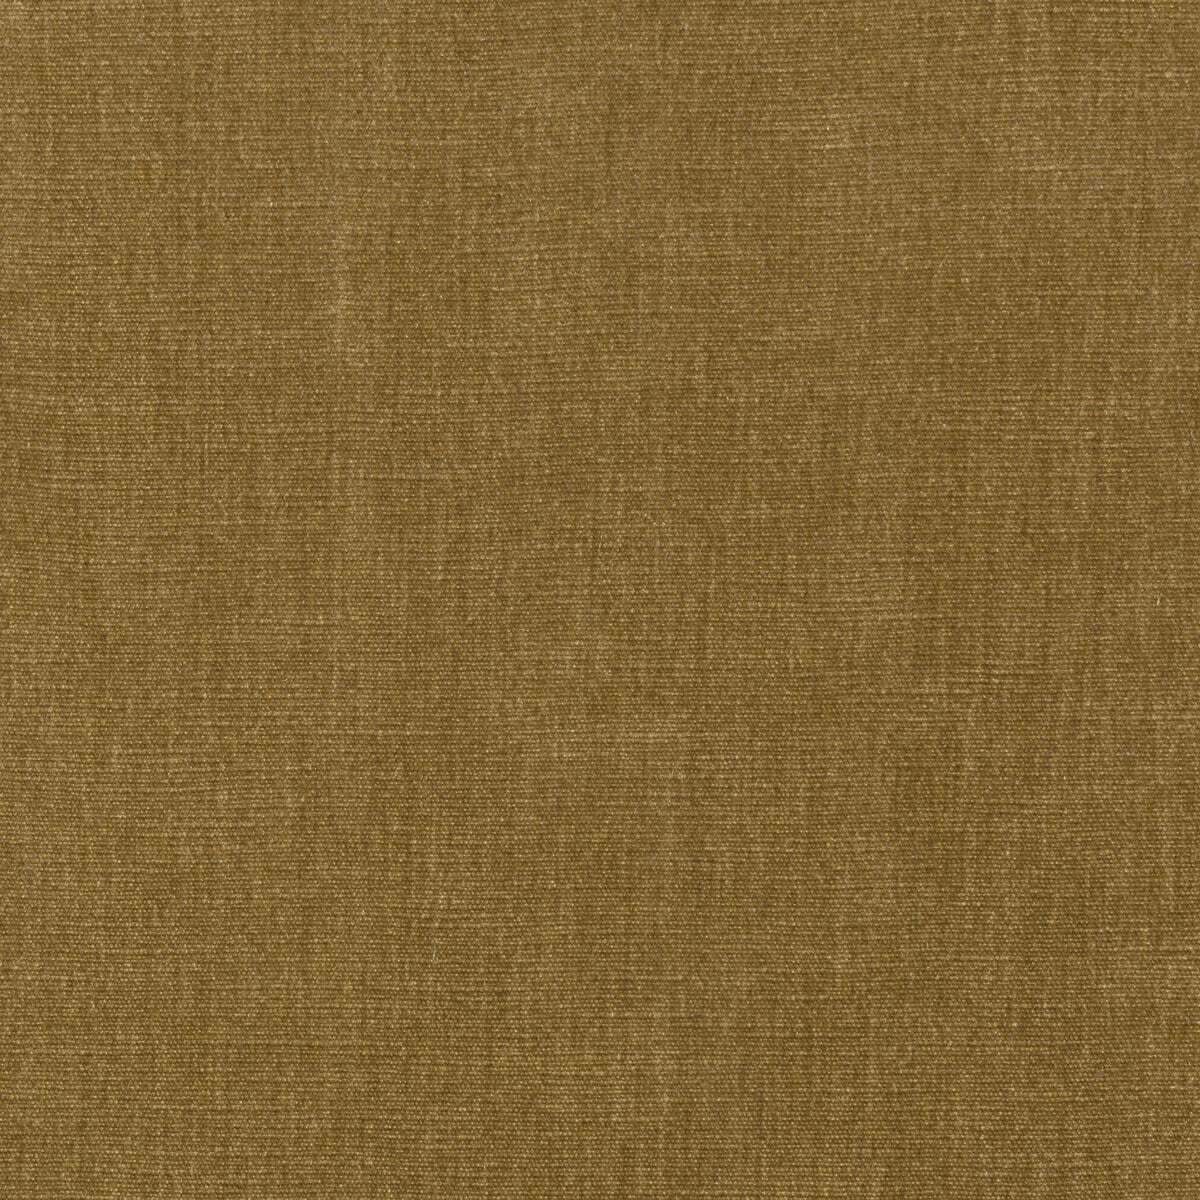 Kravet Smart fabric in 36076-6 color - pattern 36076.6.0 - by Kravet Smart in the Sumptuous Chenille II collection